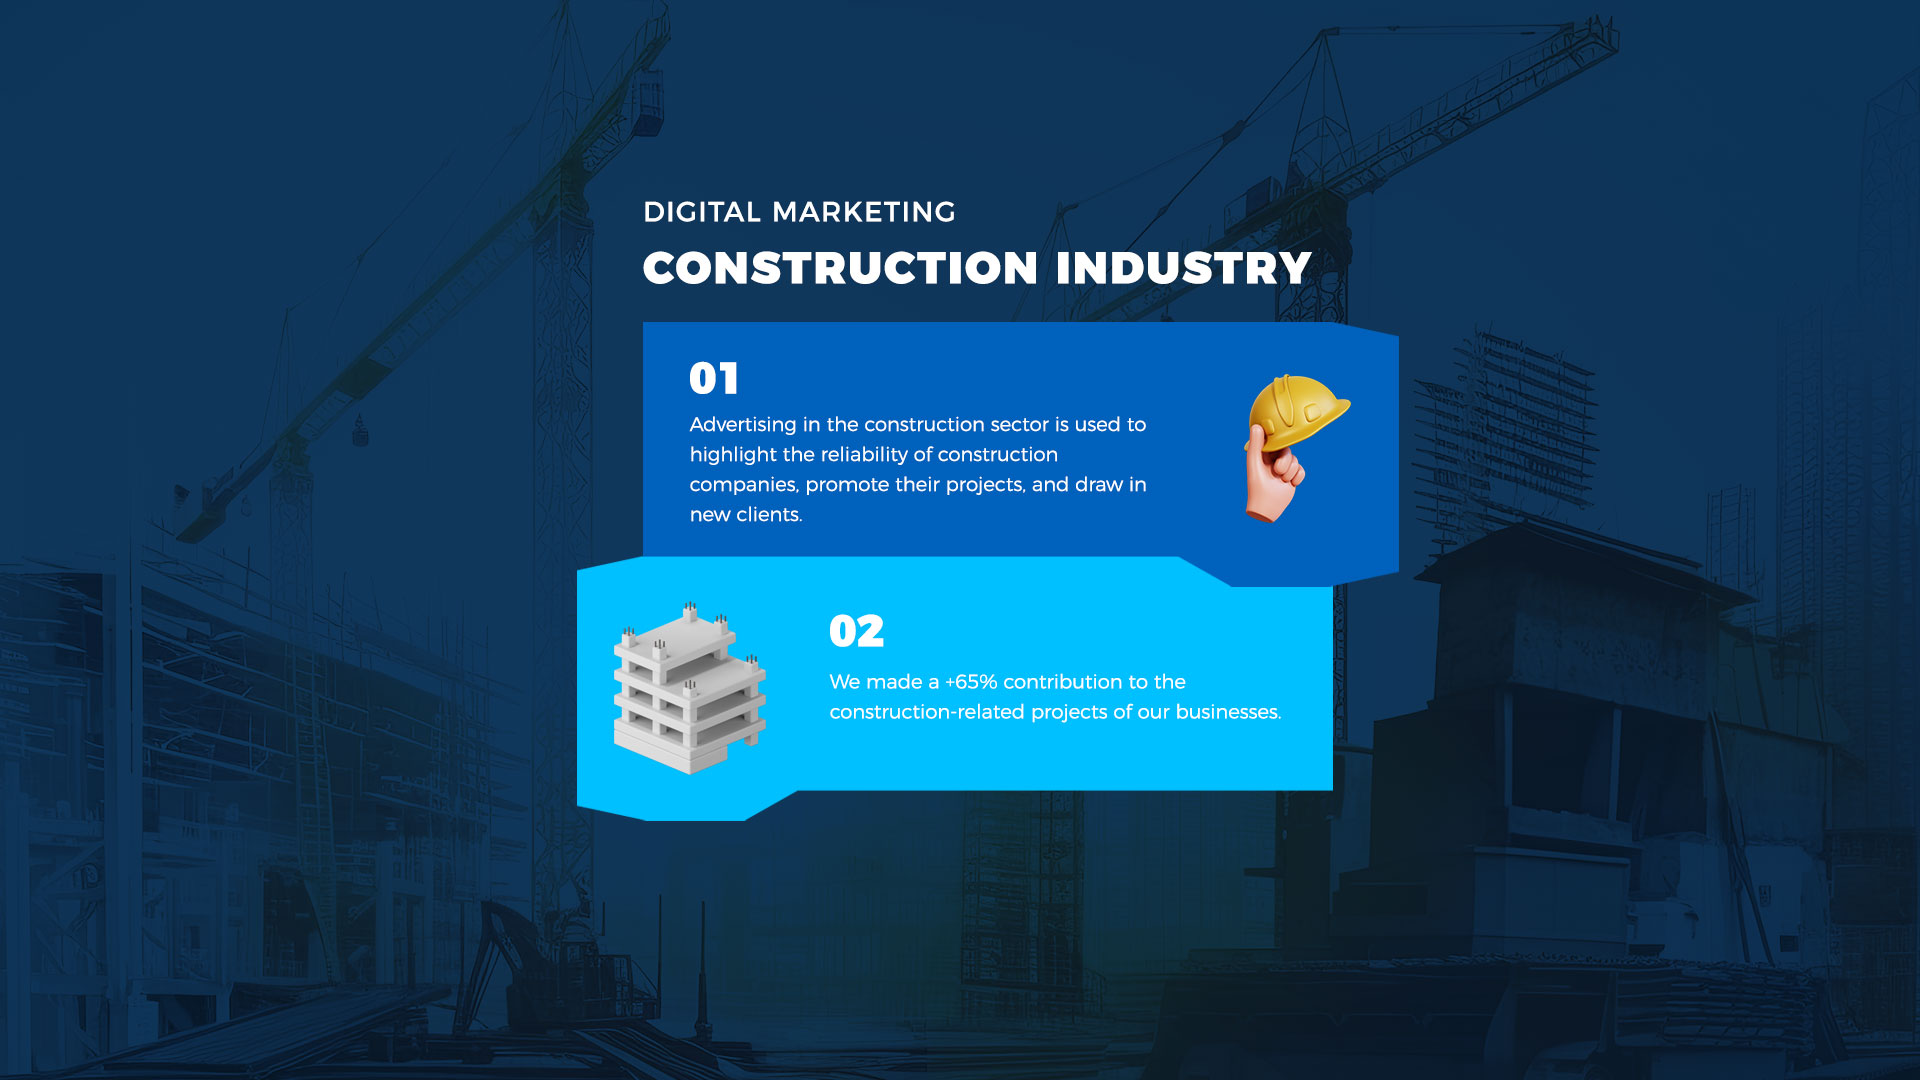 CONSTRUCTİON INDUSTRY